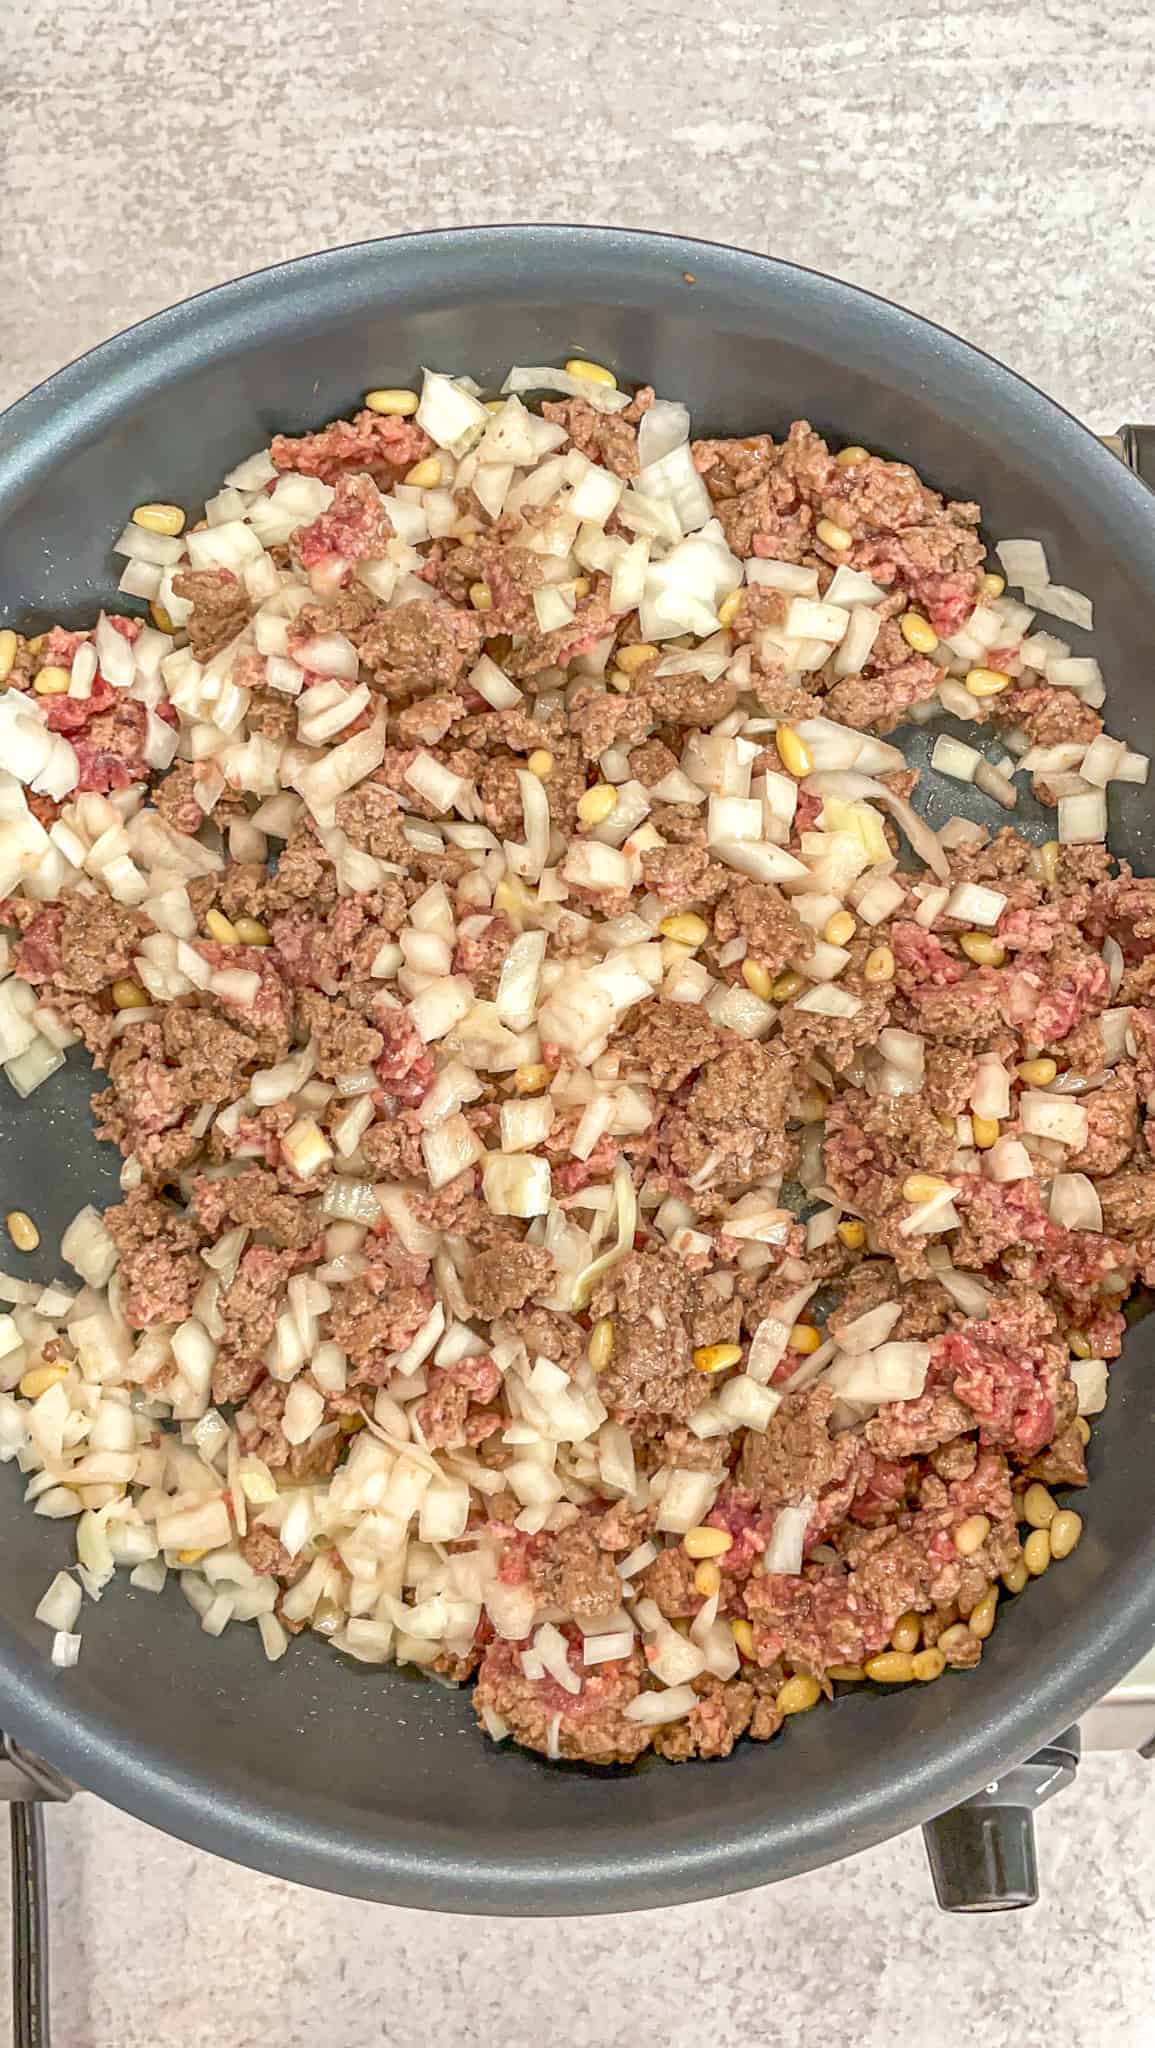 a pan contains translucent onions, pine nuts, and ground beef to be cooked to make the filling of kibbeh bil sanieh